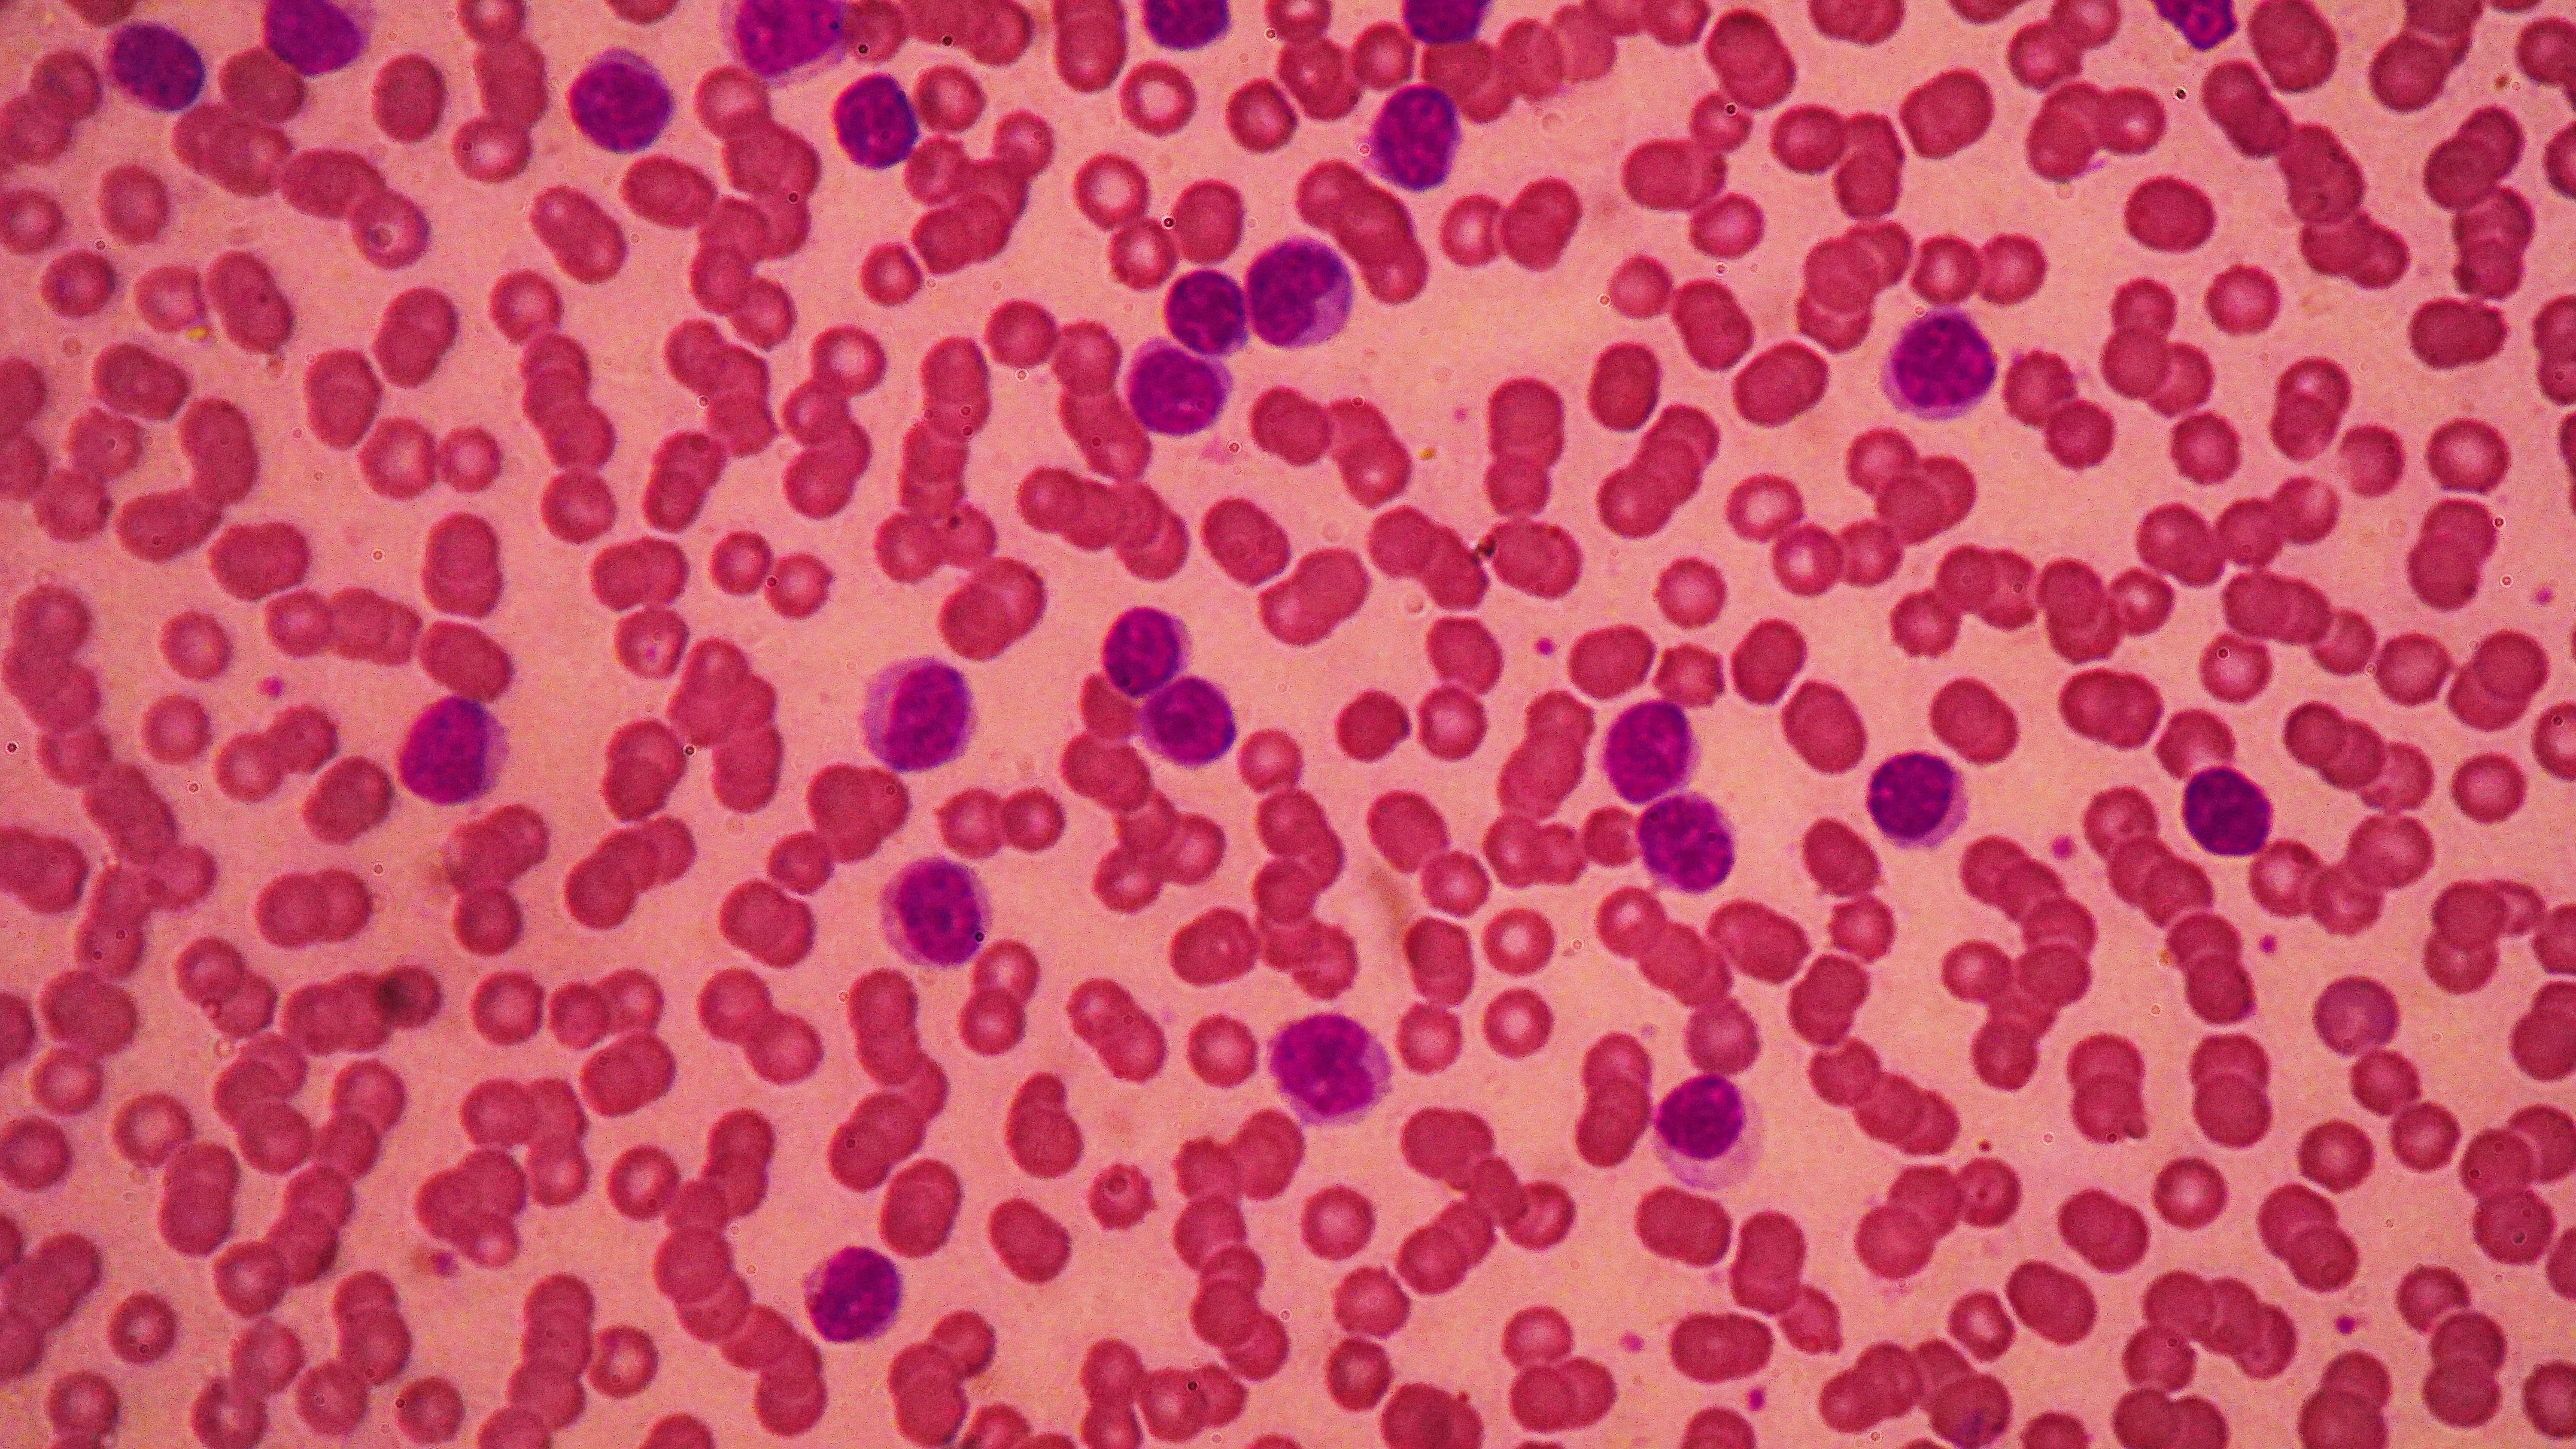 “A single administration of liso-cel demonstrated rapid, deep, and durable responses in patients with relapsed/refractory chronic lymphocytic leukemia and small lymphocytic lymphoma,” Tanya Siddiqi, MD, lead study author and medical director in the Division of Lymphoma at City of Hope Orange County in Duarte California, said.